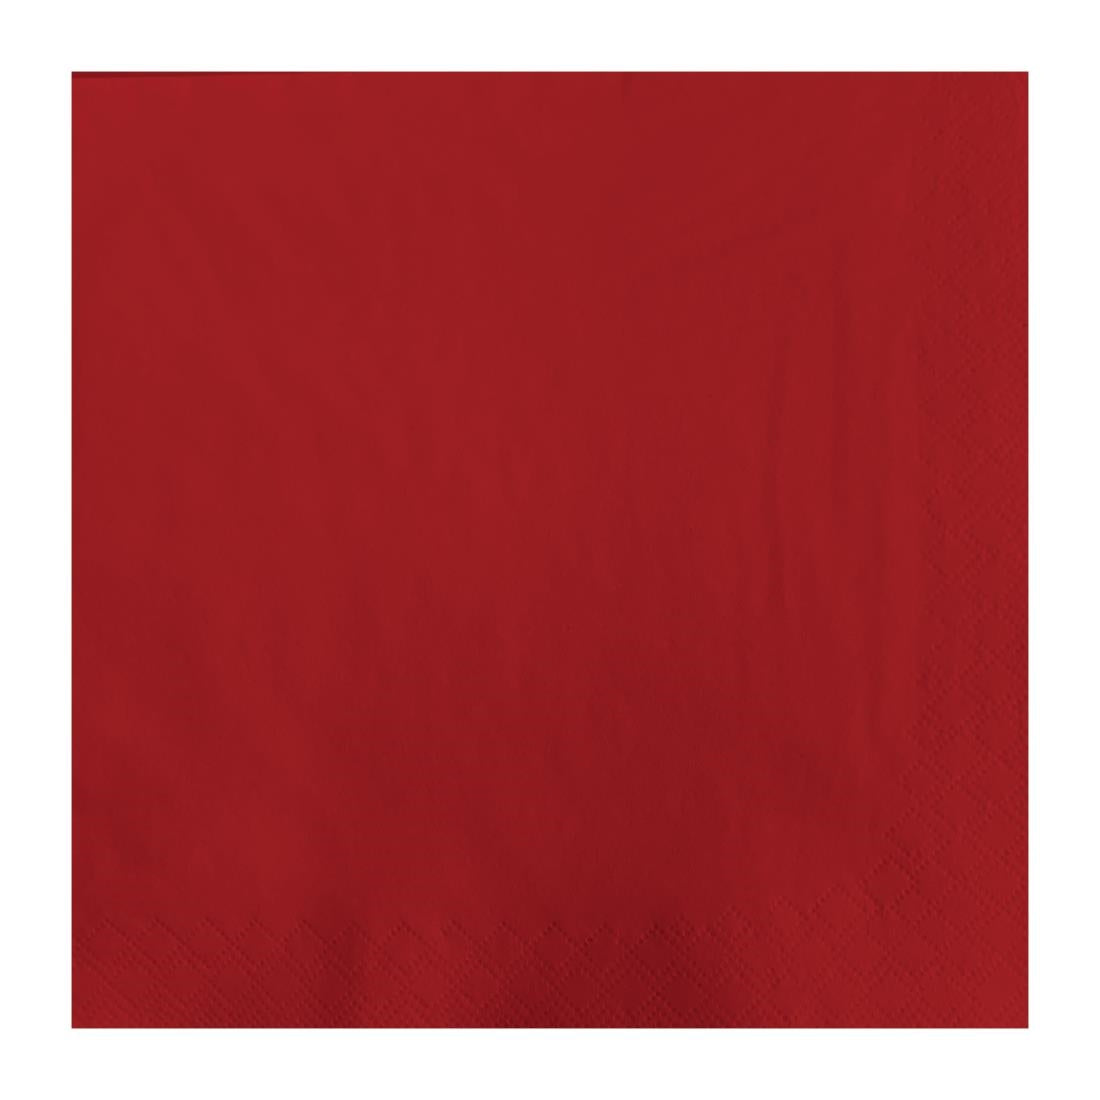 CK875 Fasana Lunch Napkin Red 33x33cm 2ply 1/4 Fold (Pack of 1500)